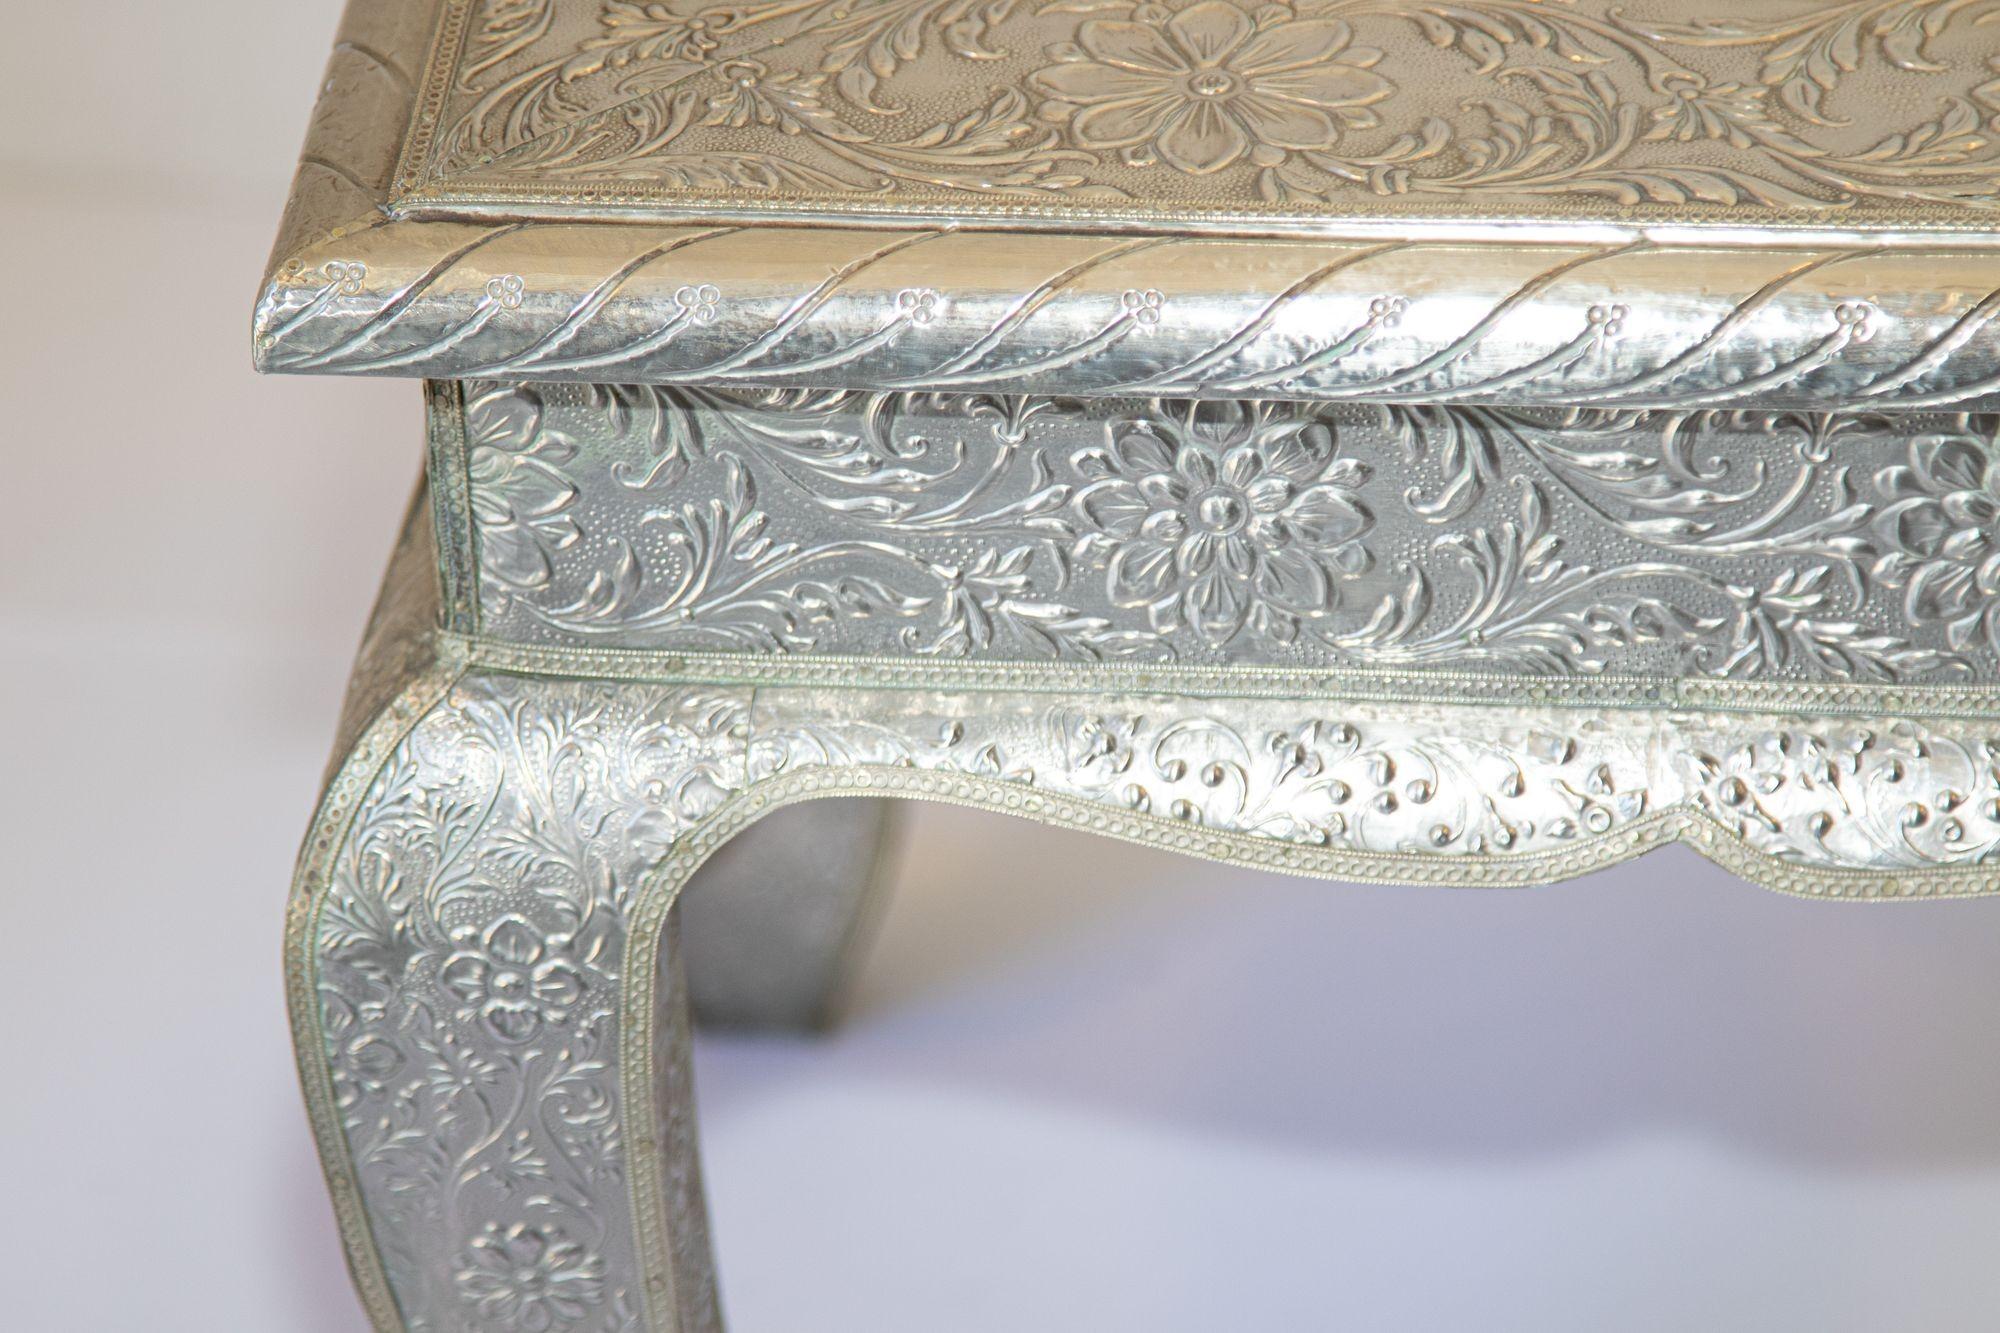 Indien 1950 Anglo-Indian Side Clad Silver Wrapped Low Table en vente